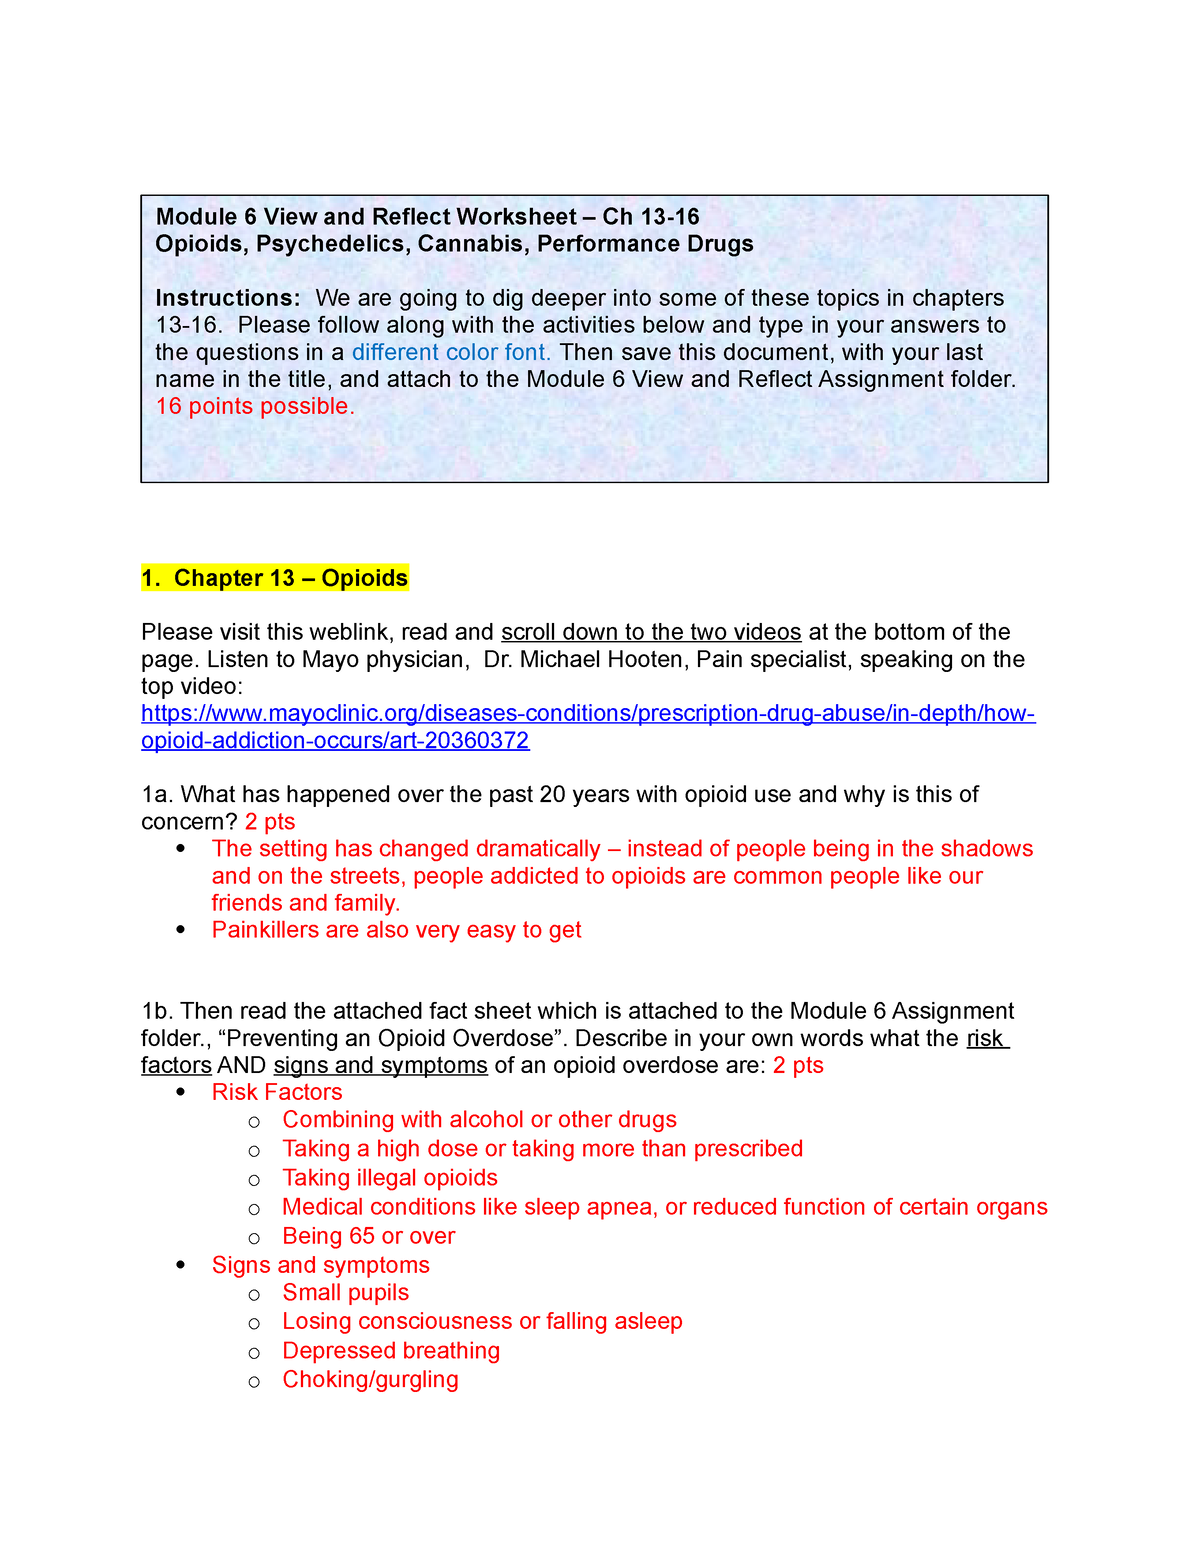 Module 6 View and Reflect Worksheet (6) - 1. Chapter 13 – Opioids ...